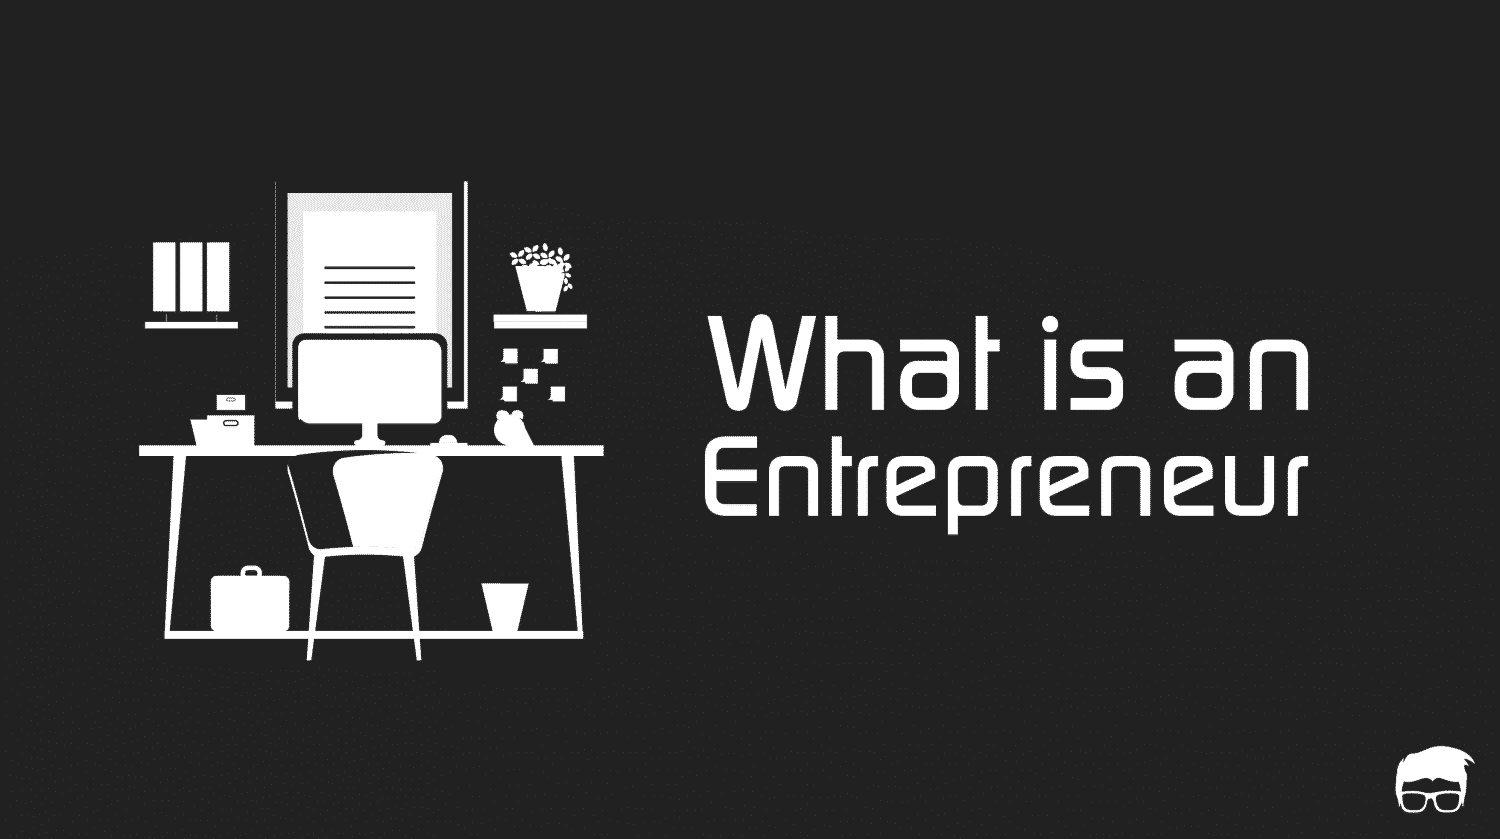 Who is an Entrepreneur? - Characteristics & Types